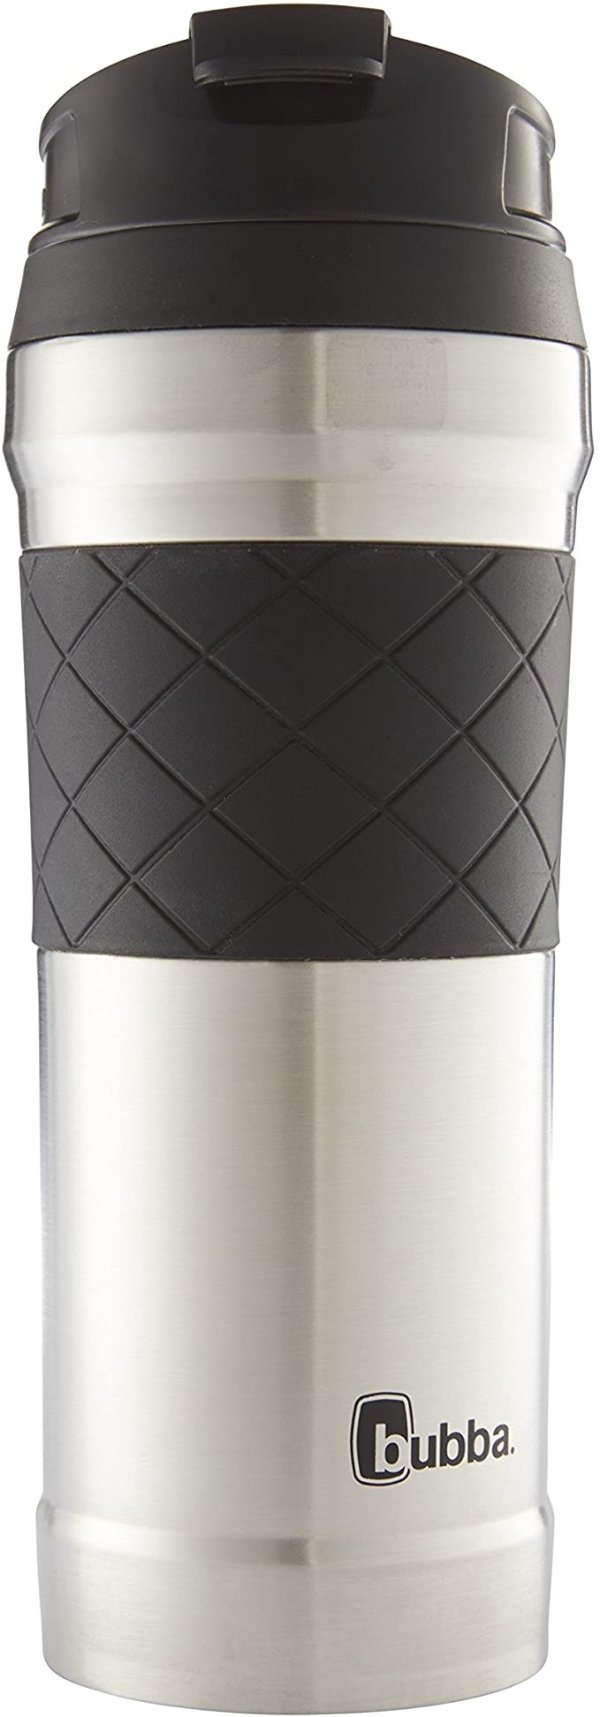 Insulated Stainless Steel Tumbler with TasteGuard, 16 oz., Stainless Steel